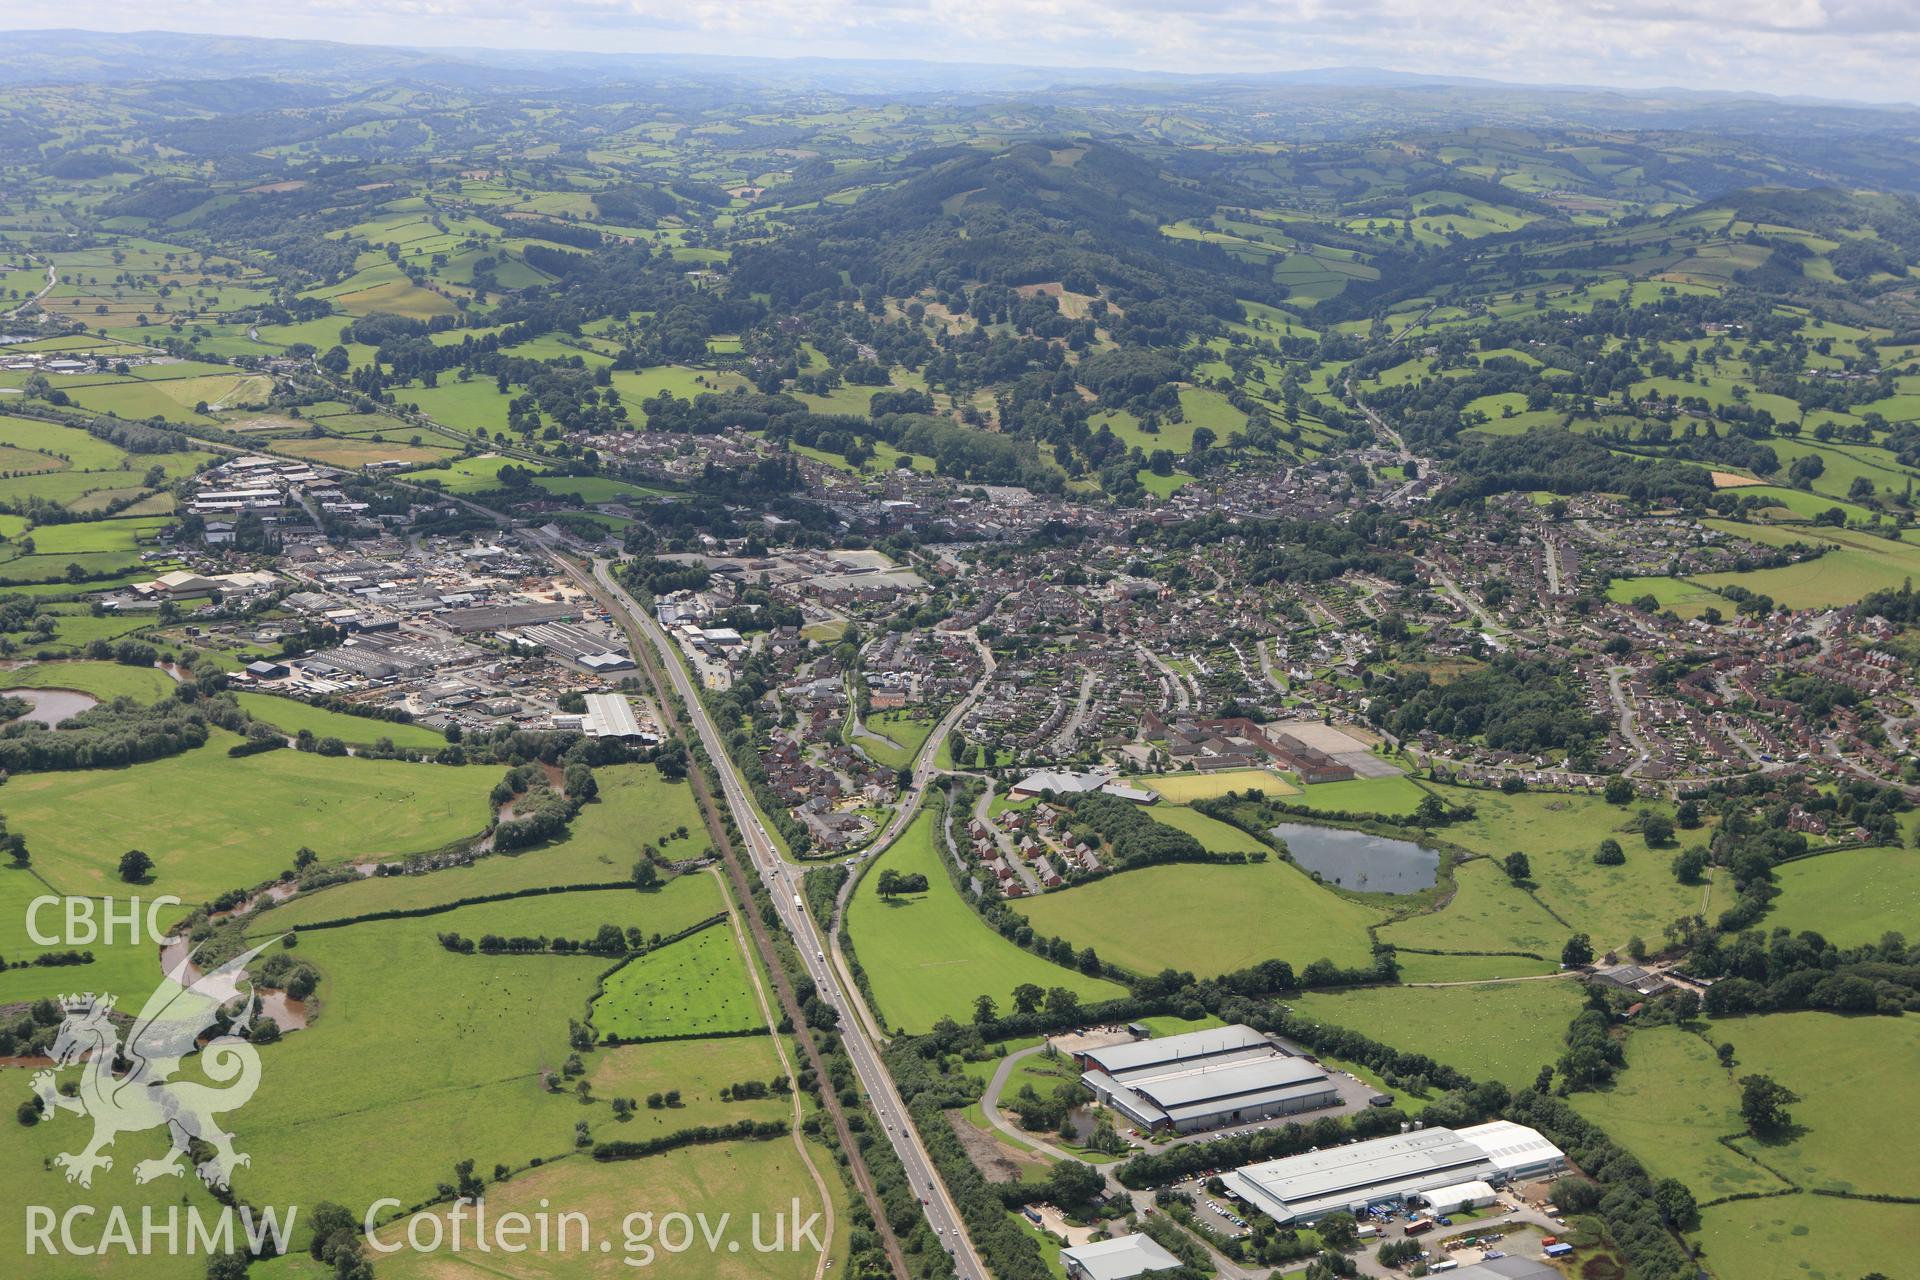 RCAHMW colour oblique aerial photograph of Welshpool. Taken on 30 July 2009 by Toby Driver